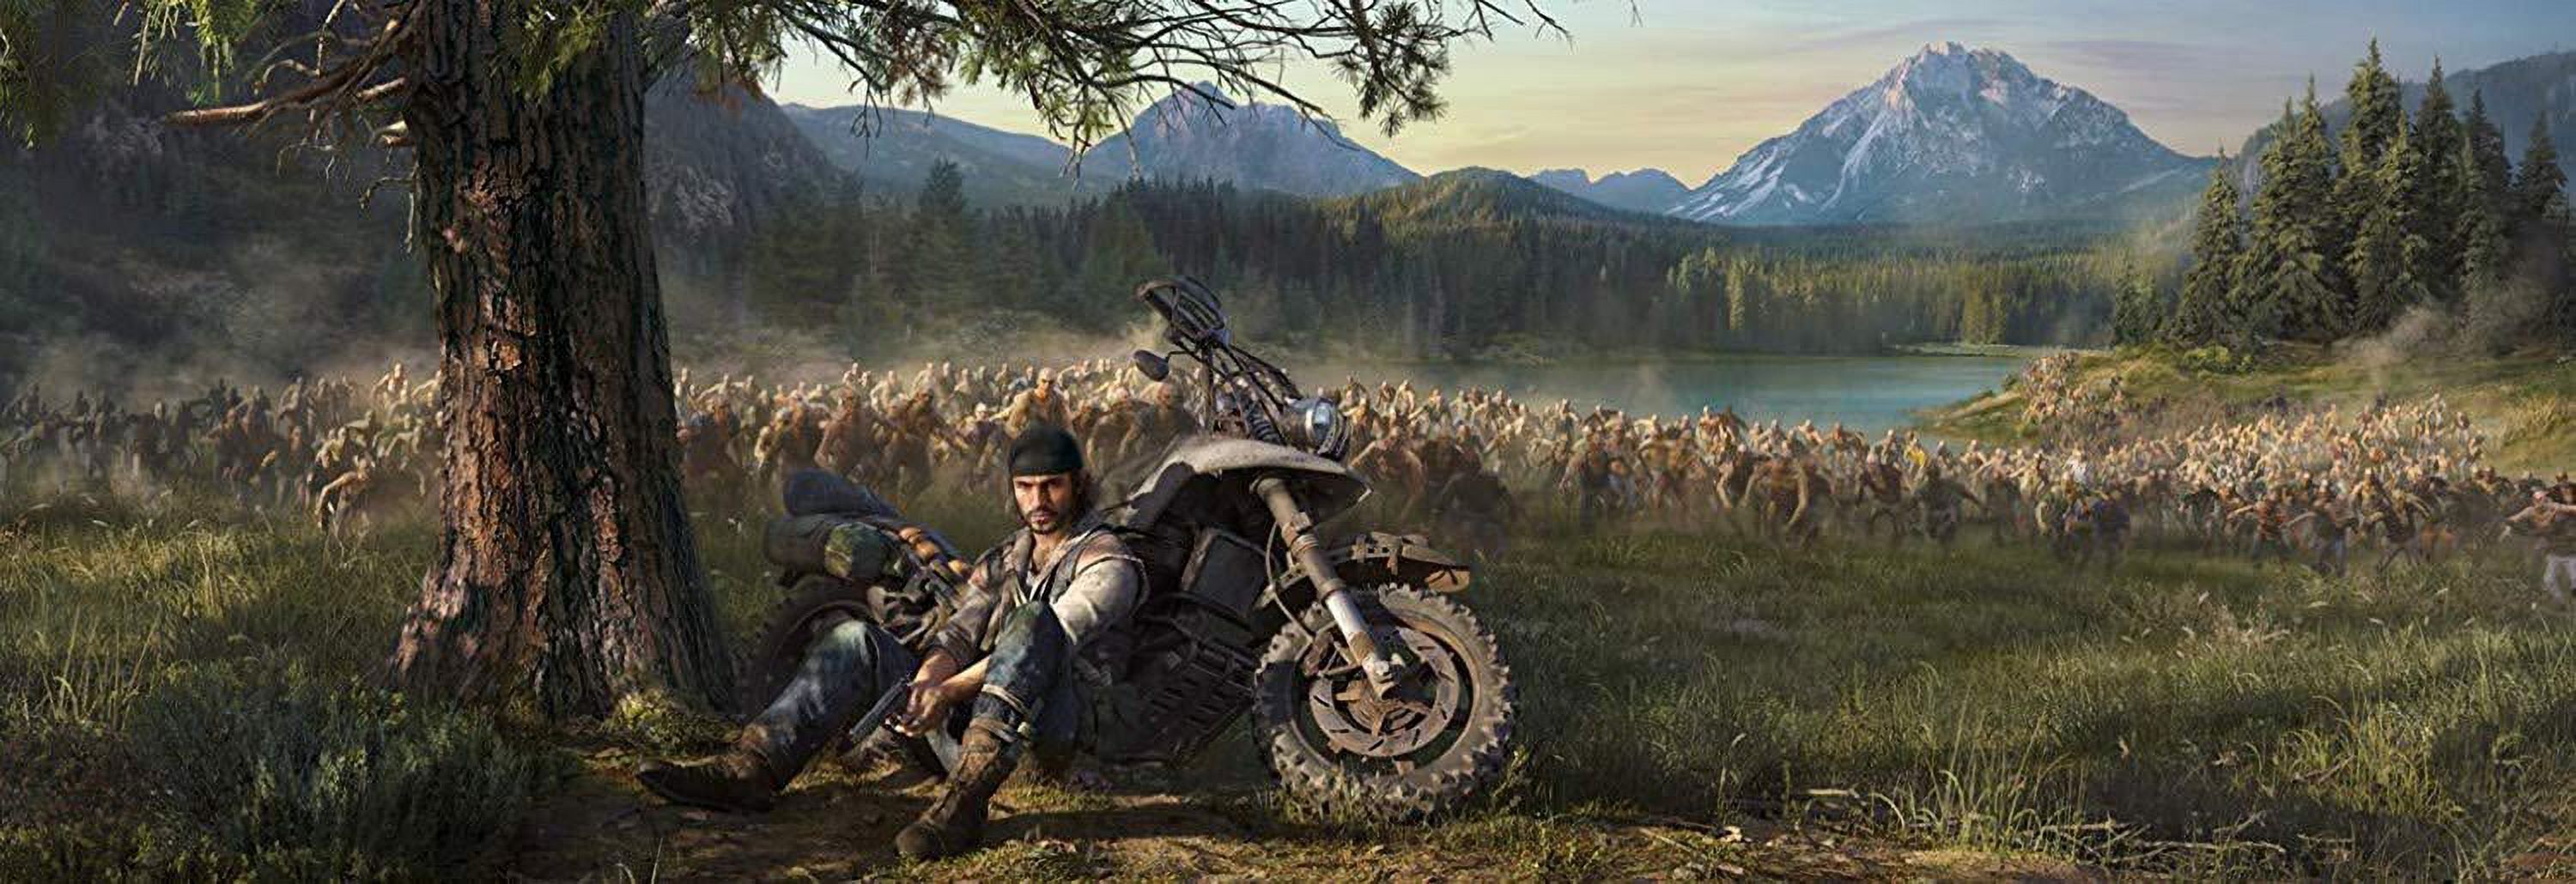 Days Gone, Sony, PlayStation 4, 711719504757 - image 4 of 14